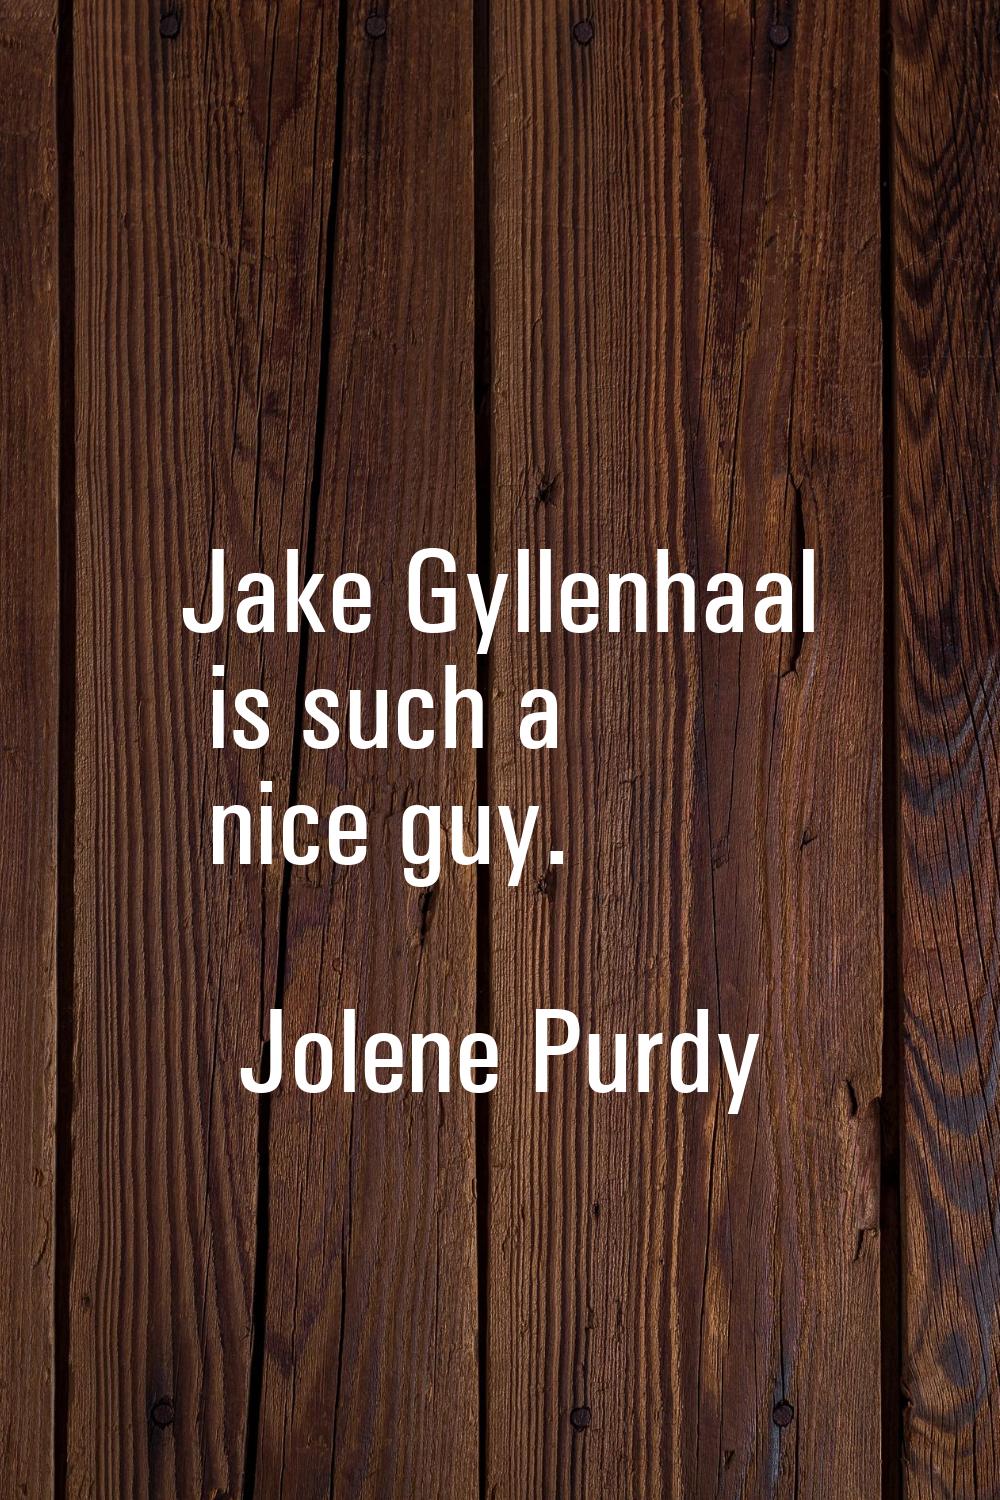 Jake Gyllenhaal is such a nice guy.